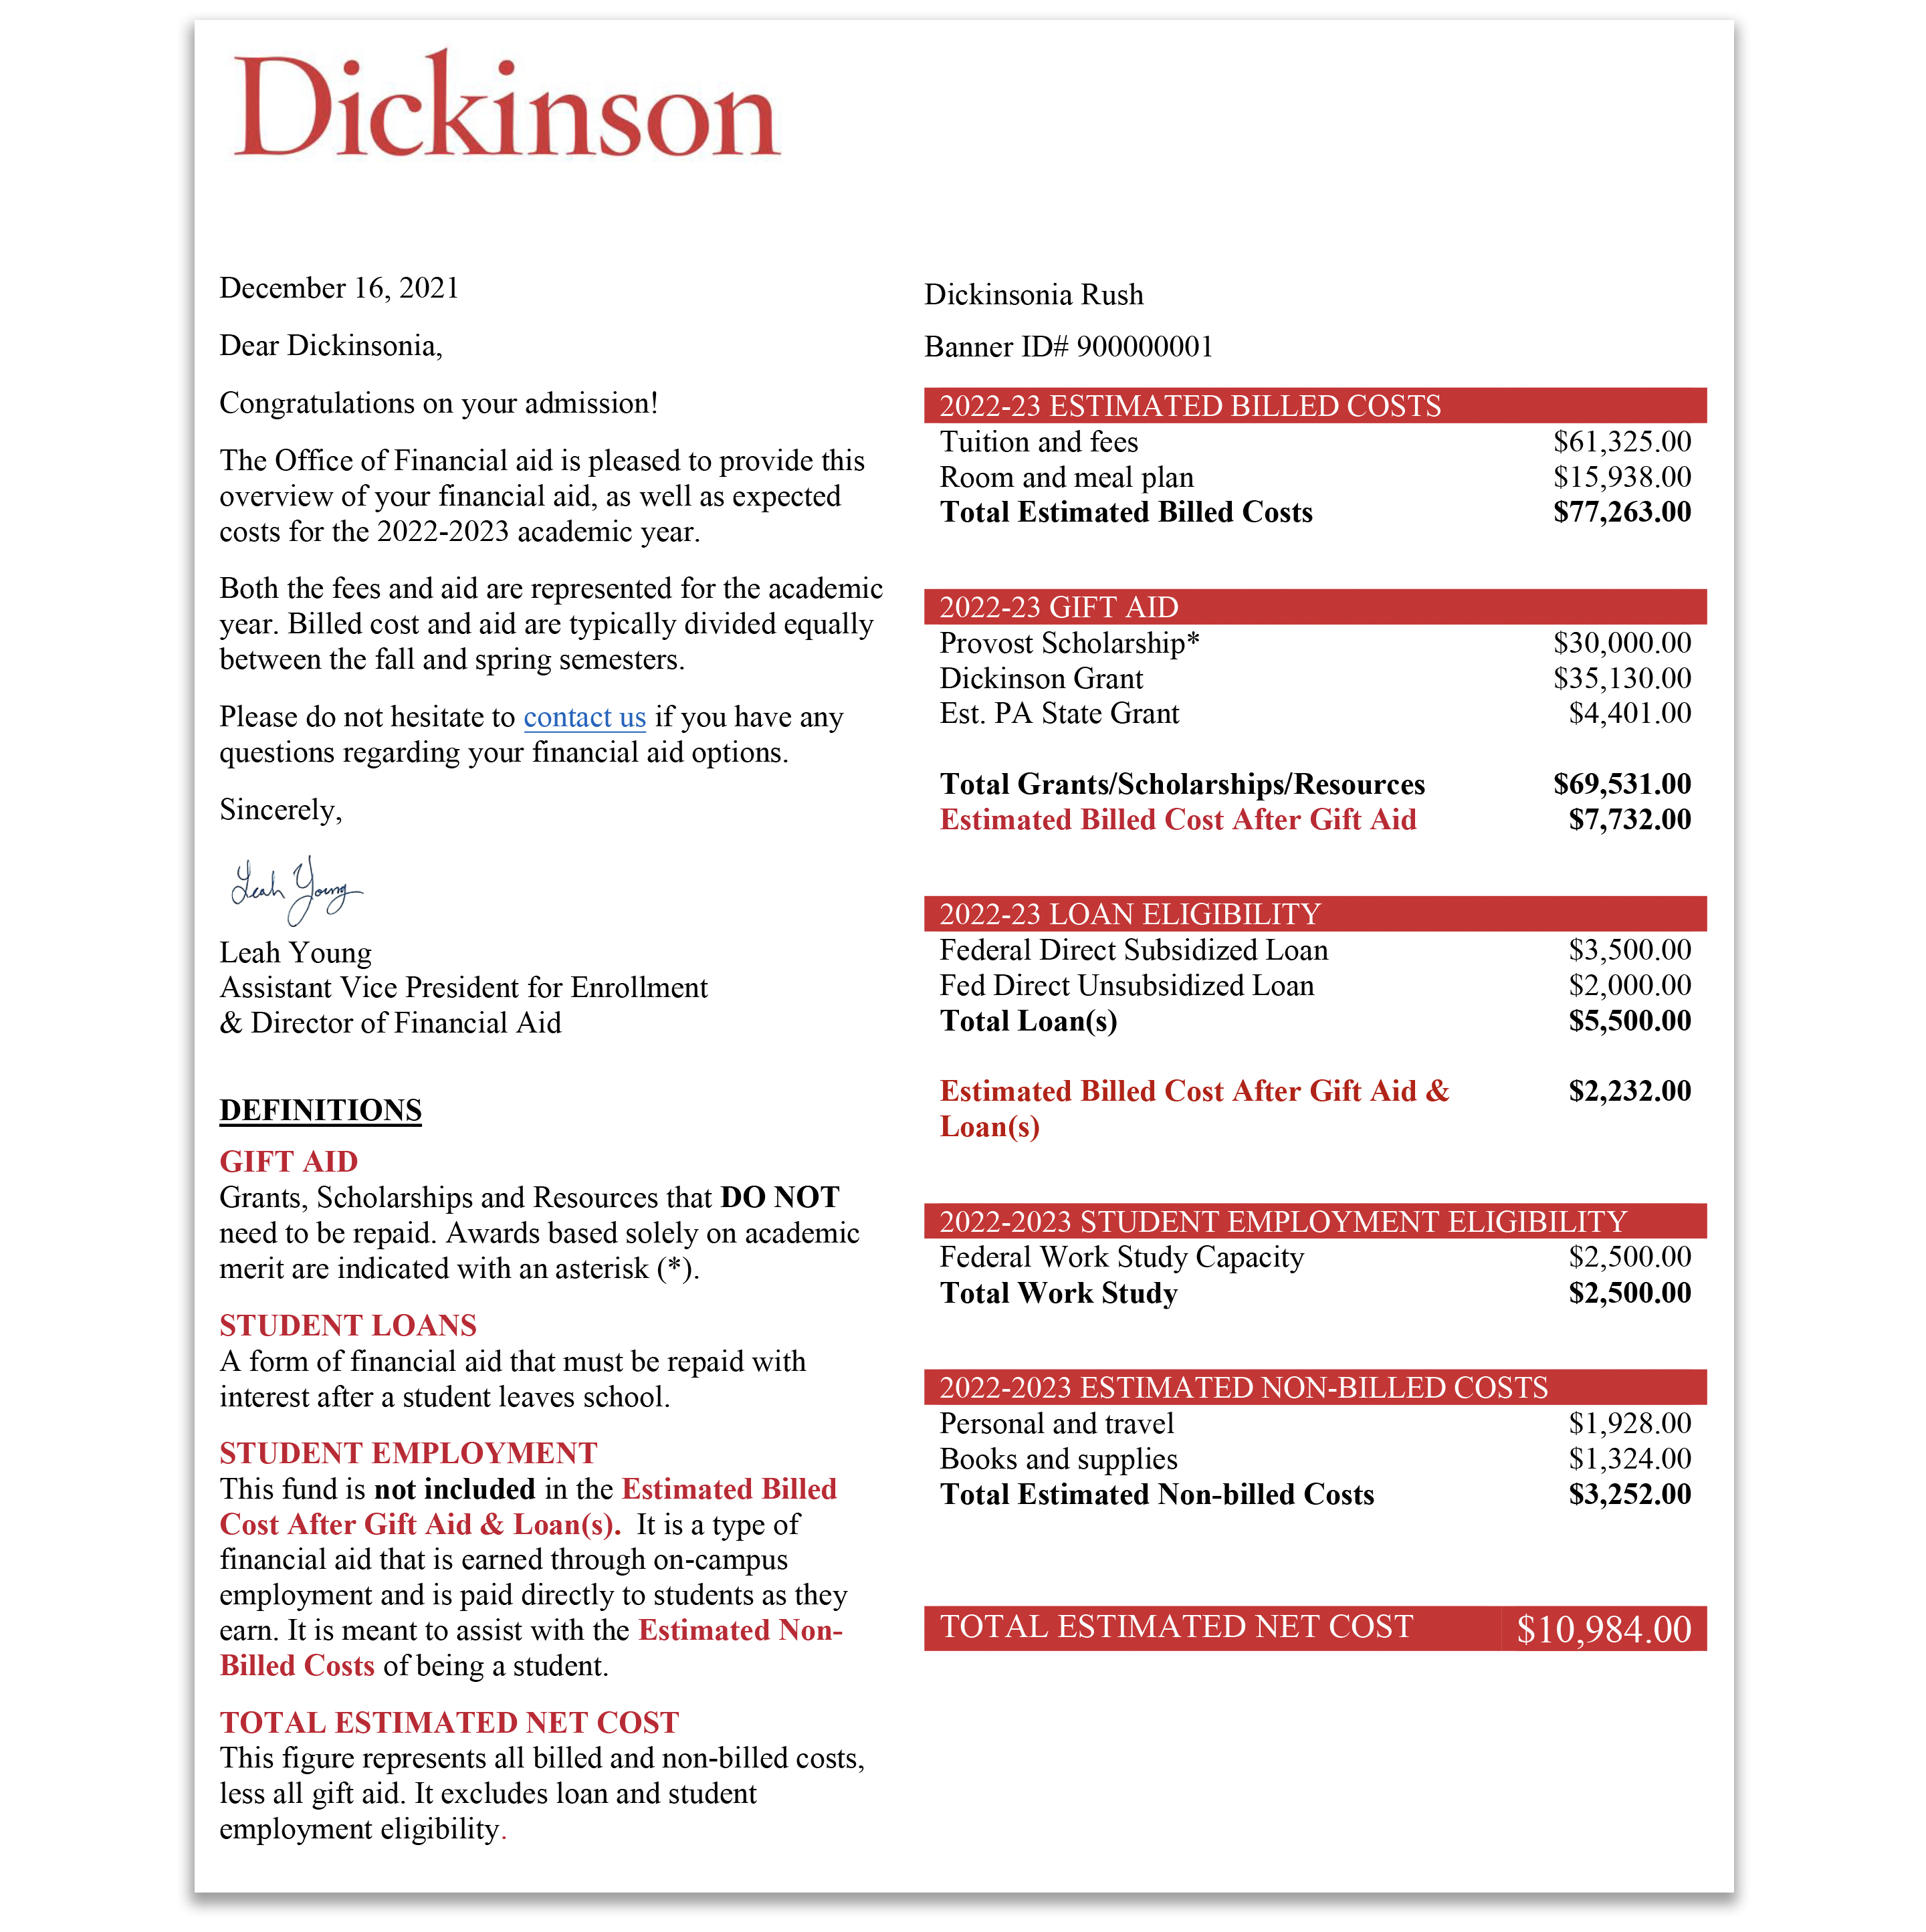 Financial Aid Letter example from Dickinson